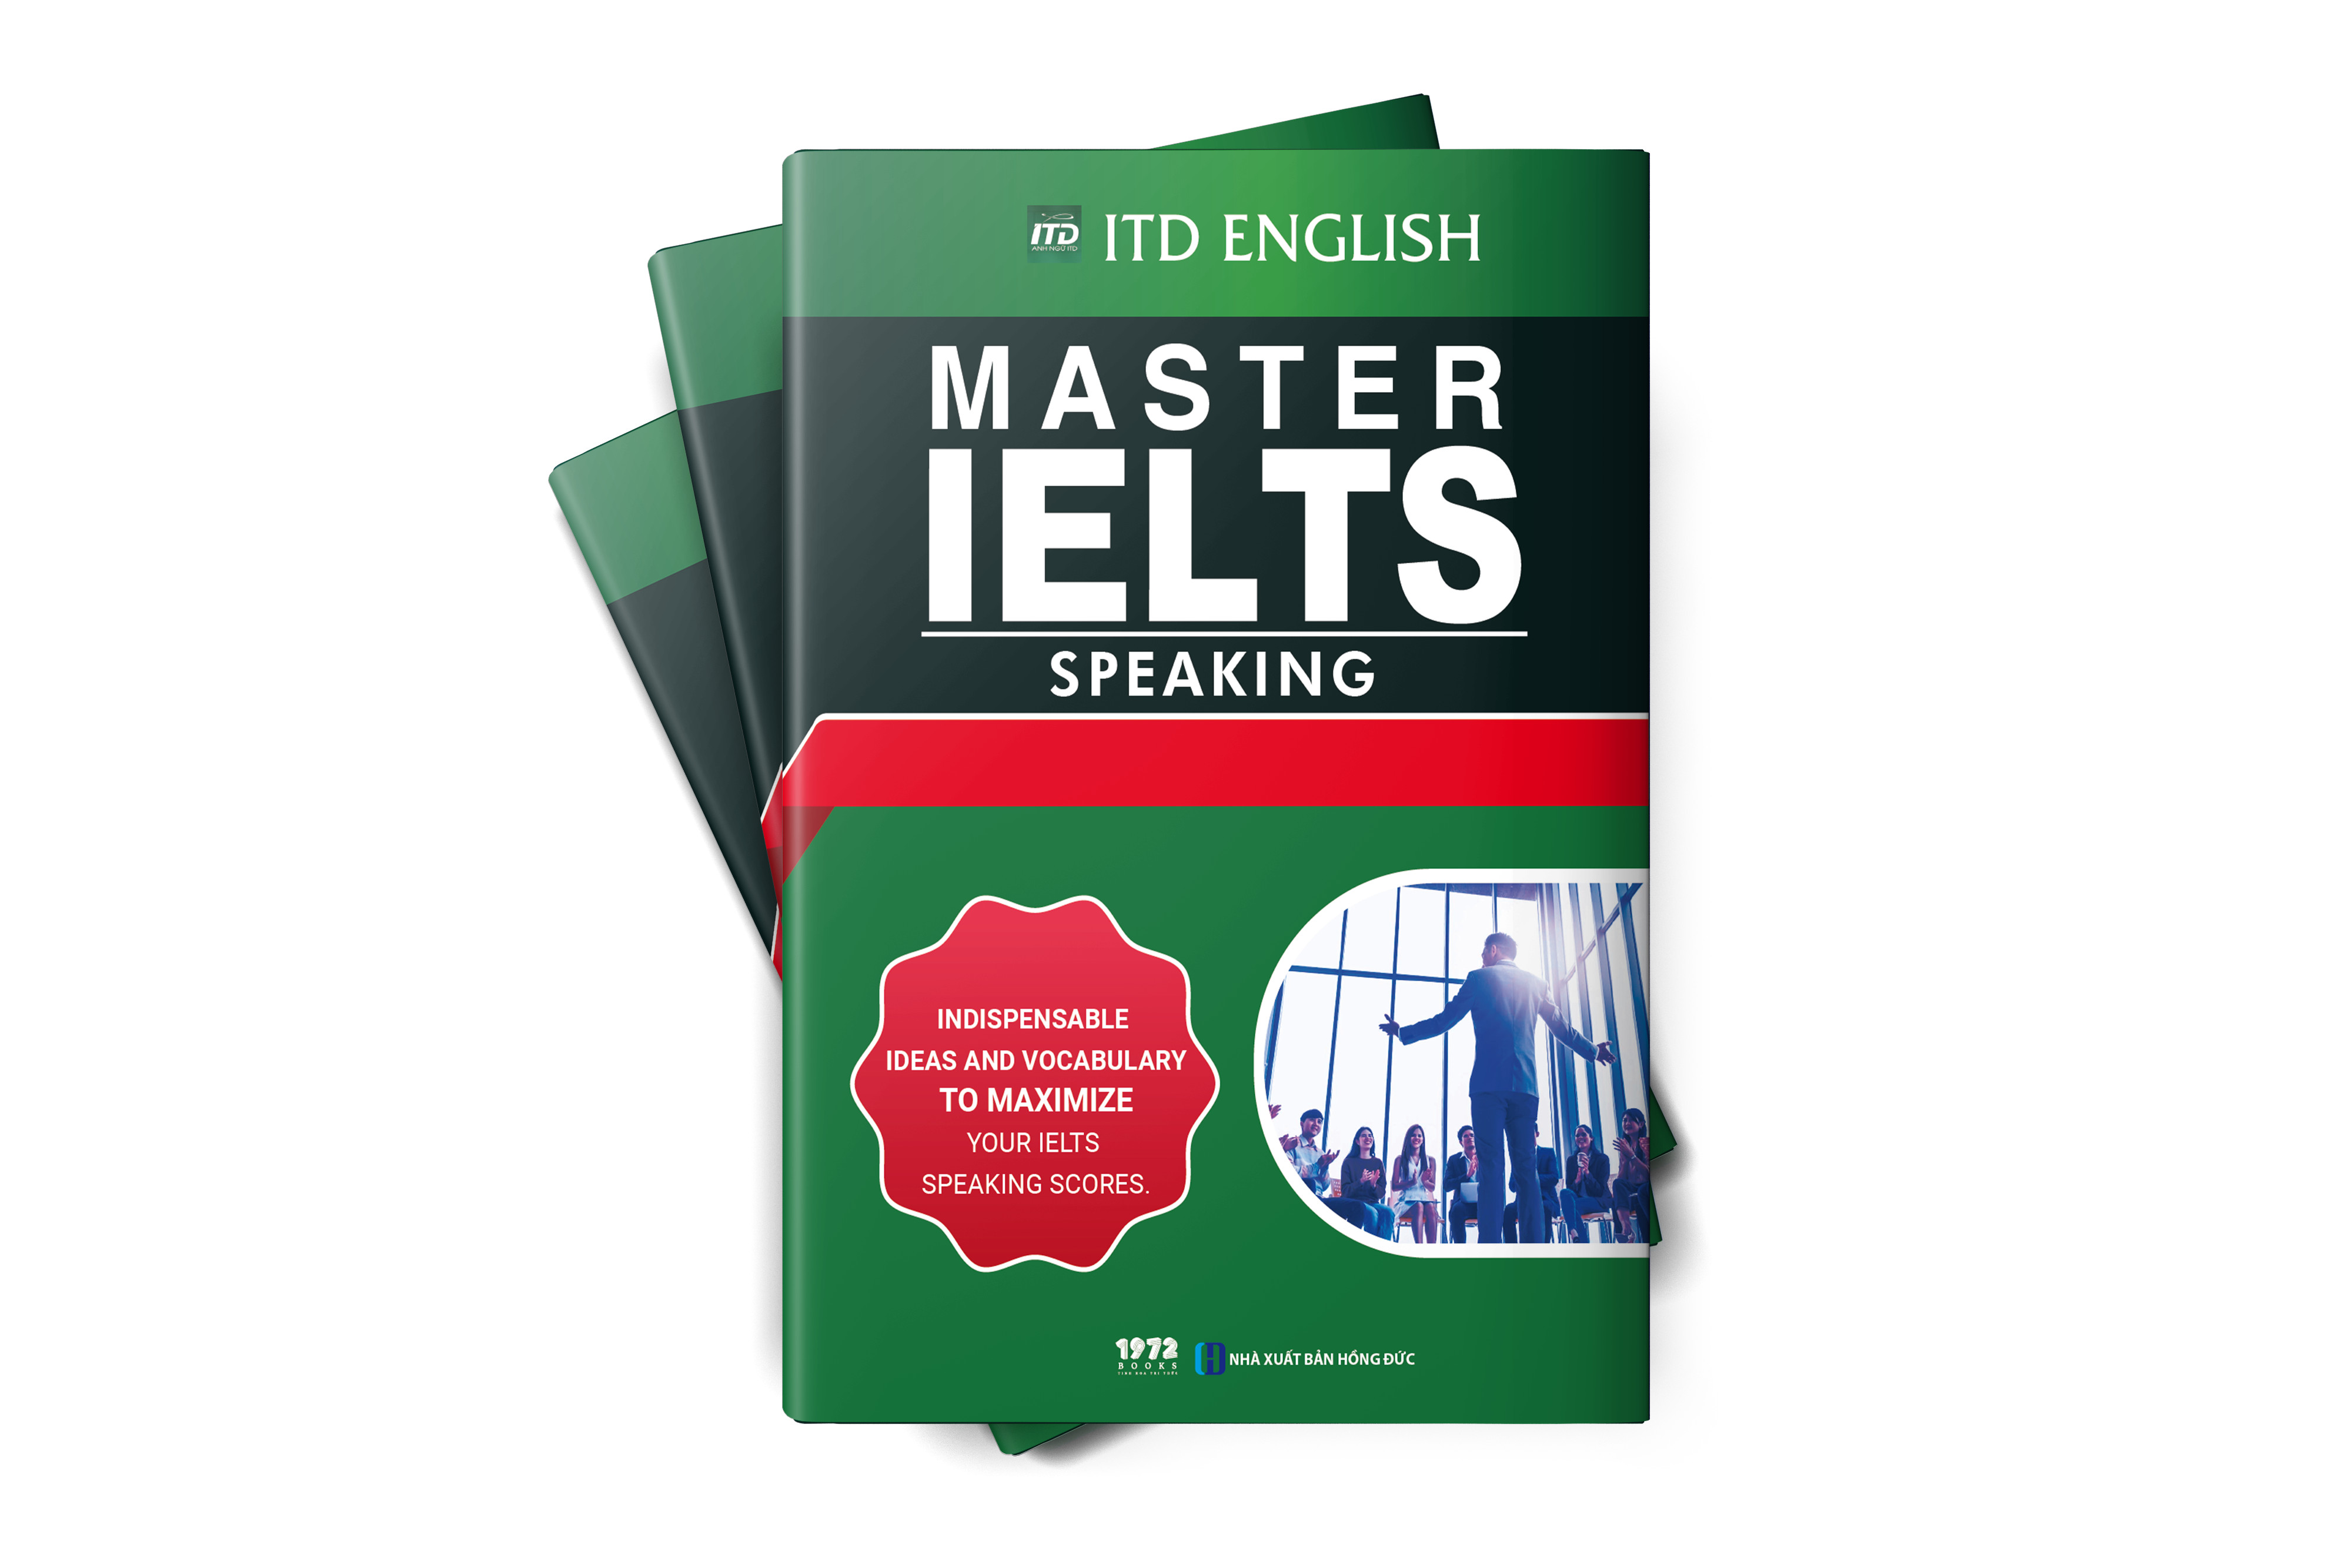 MASTER IELTS: SPEAKING - Indispensable Ideas And Vocabulary To Maximize Your Ielts Speaking Scores